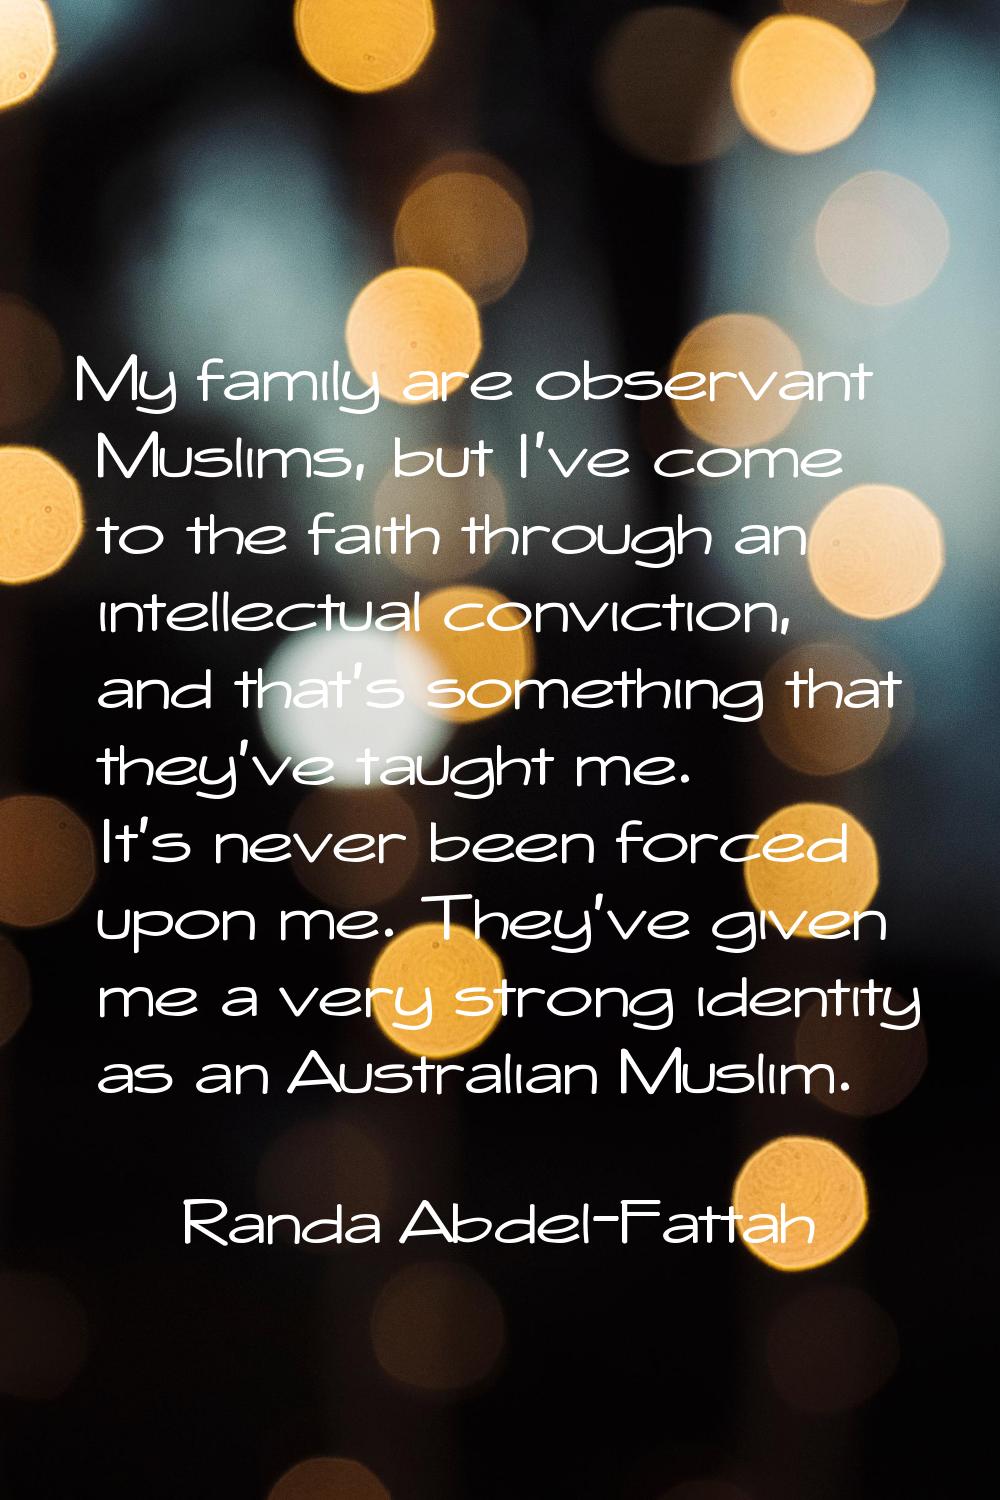 My family are observant Muslims, but I've come to the faith through an intellectual conviction, and